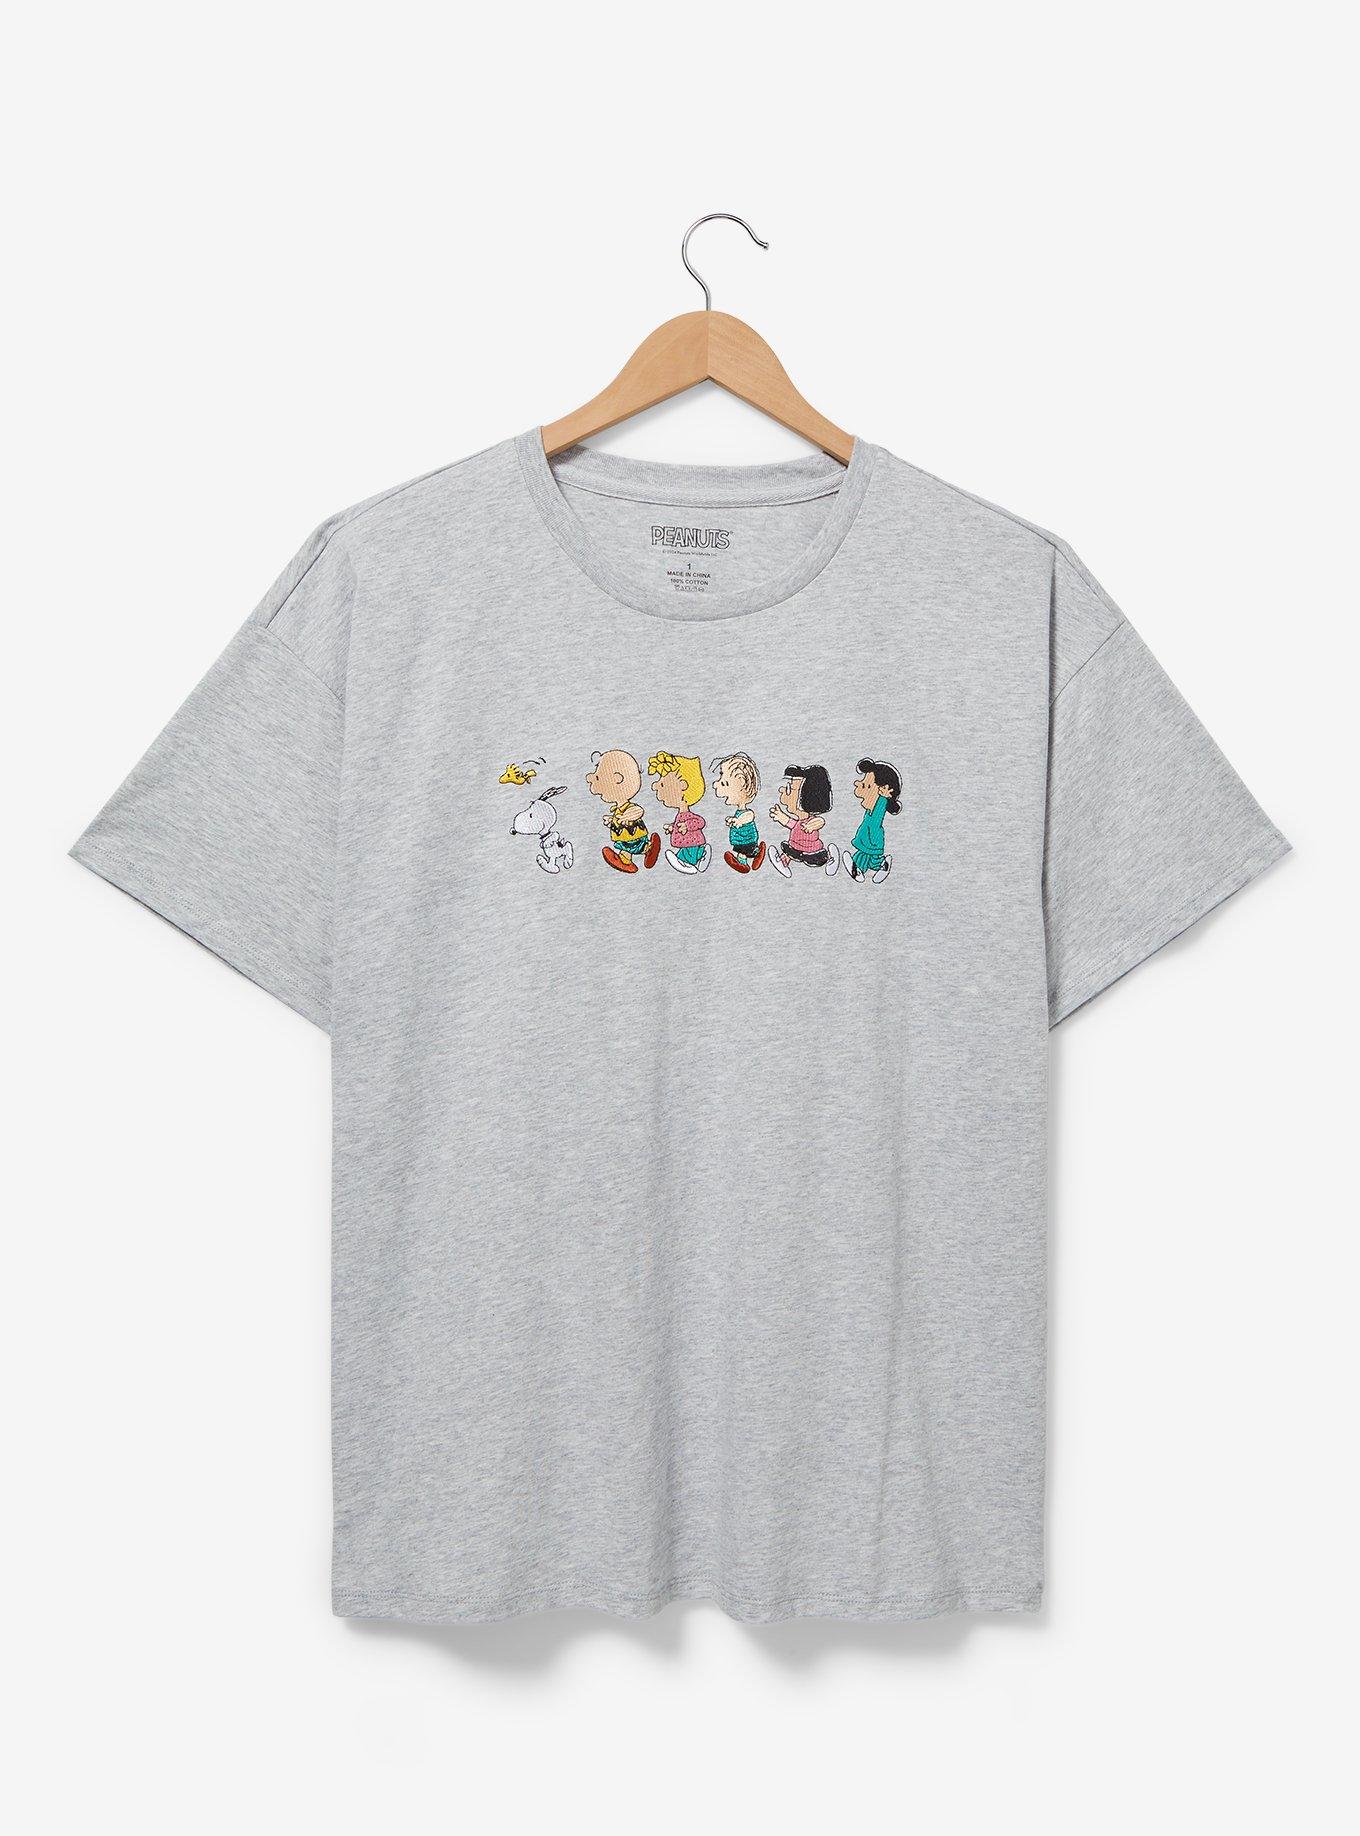 Peanuts Characters Running Women's Plus Size T-Shirt - BoxLunch Exclusive, , hi-res